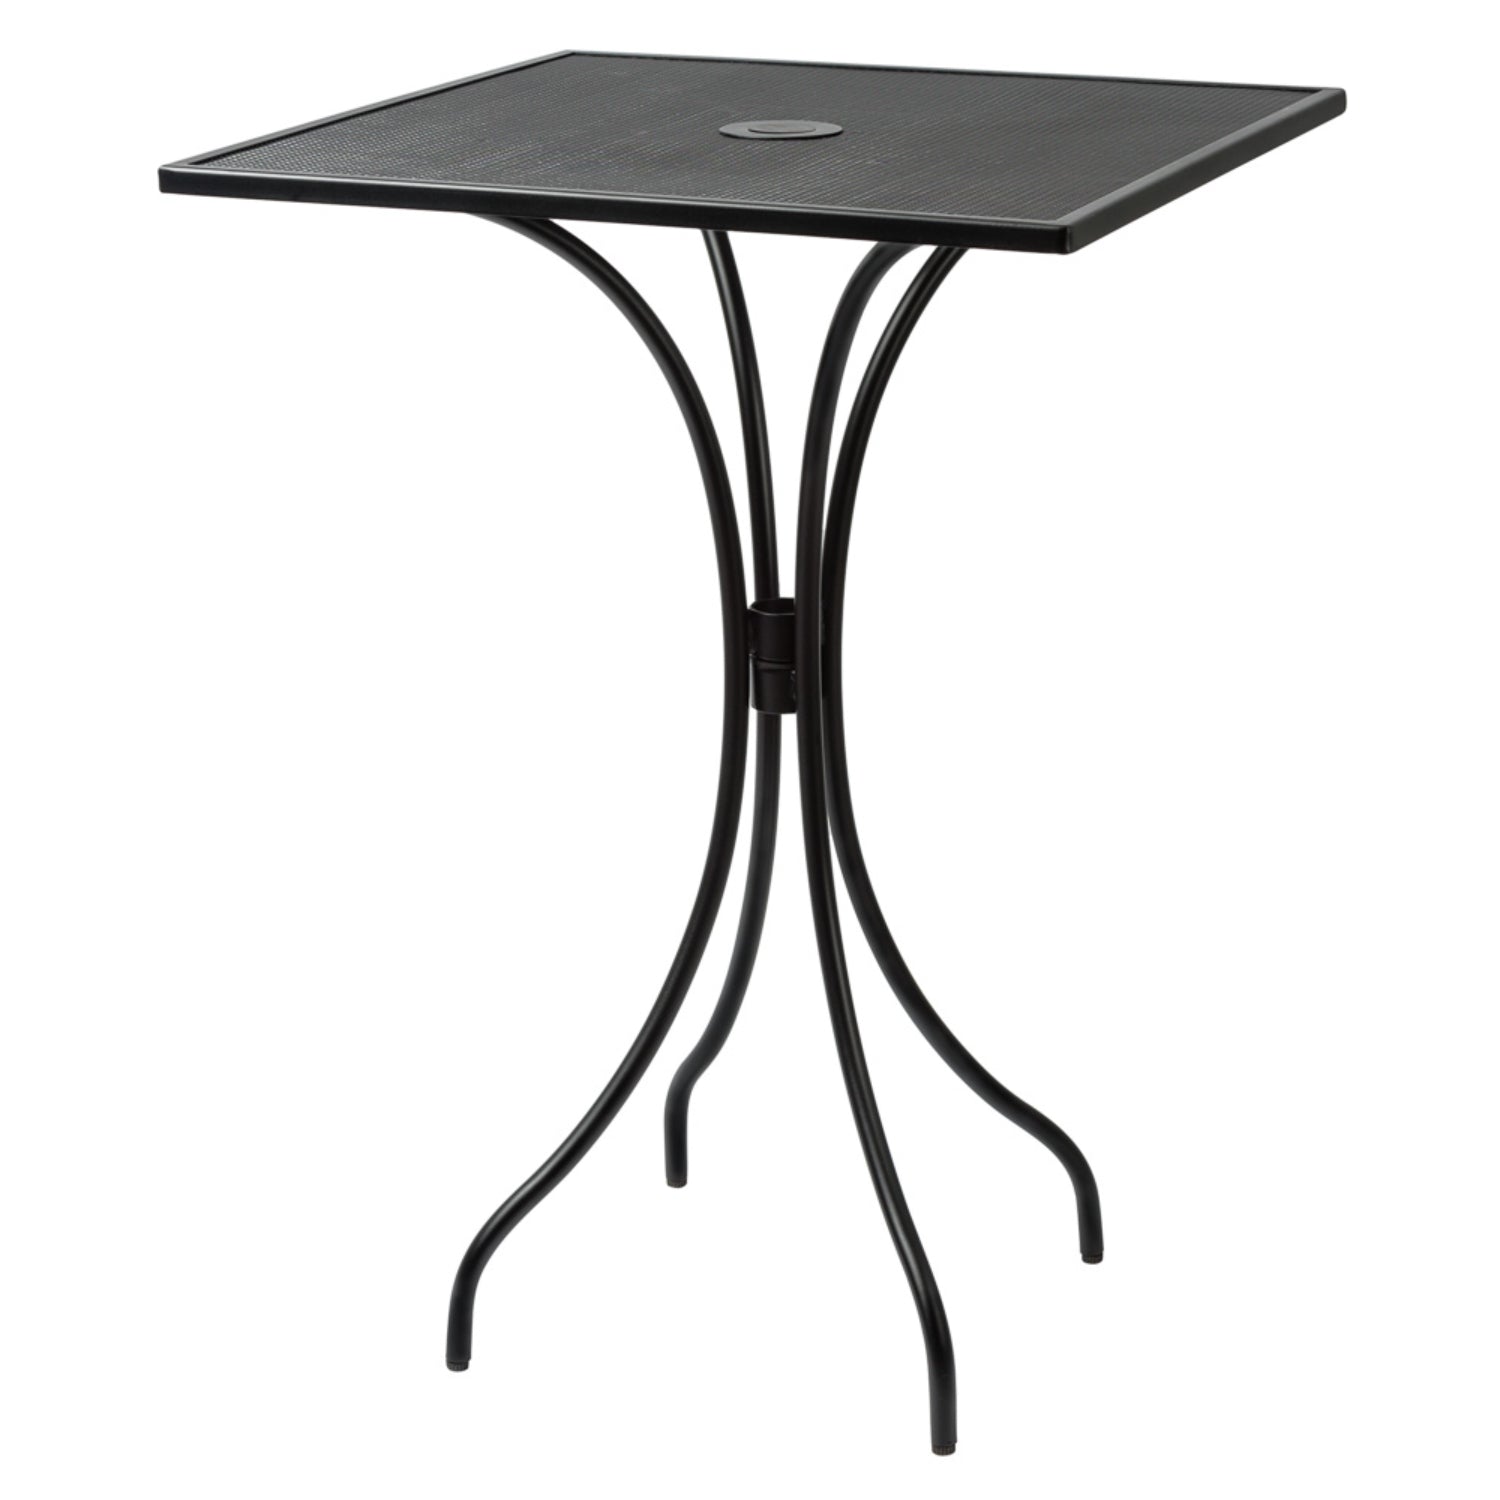 Barnegat Collection Outdoor/Indoor Black Steel 30" Square Bar Height Table with Umbrella Hole